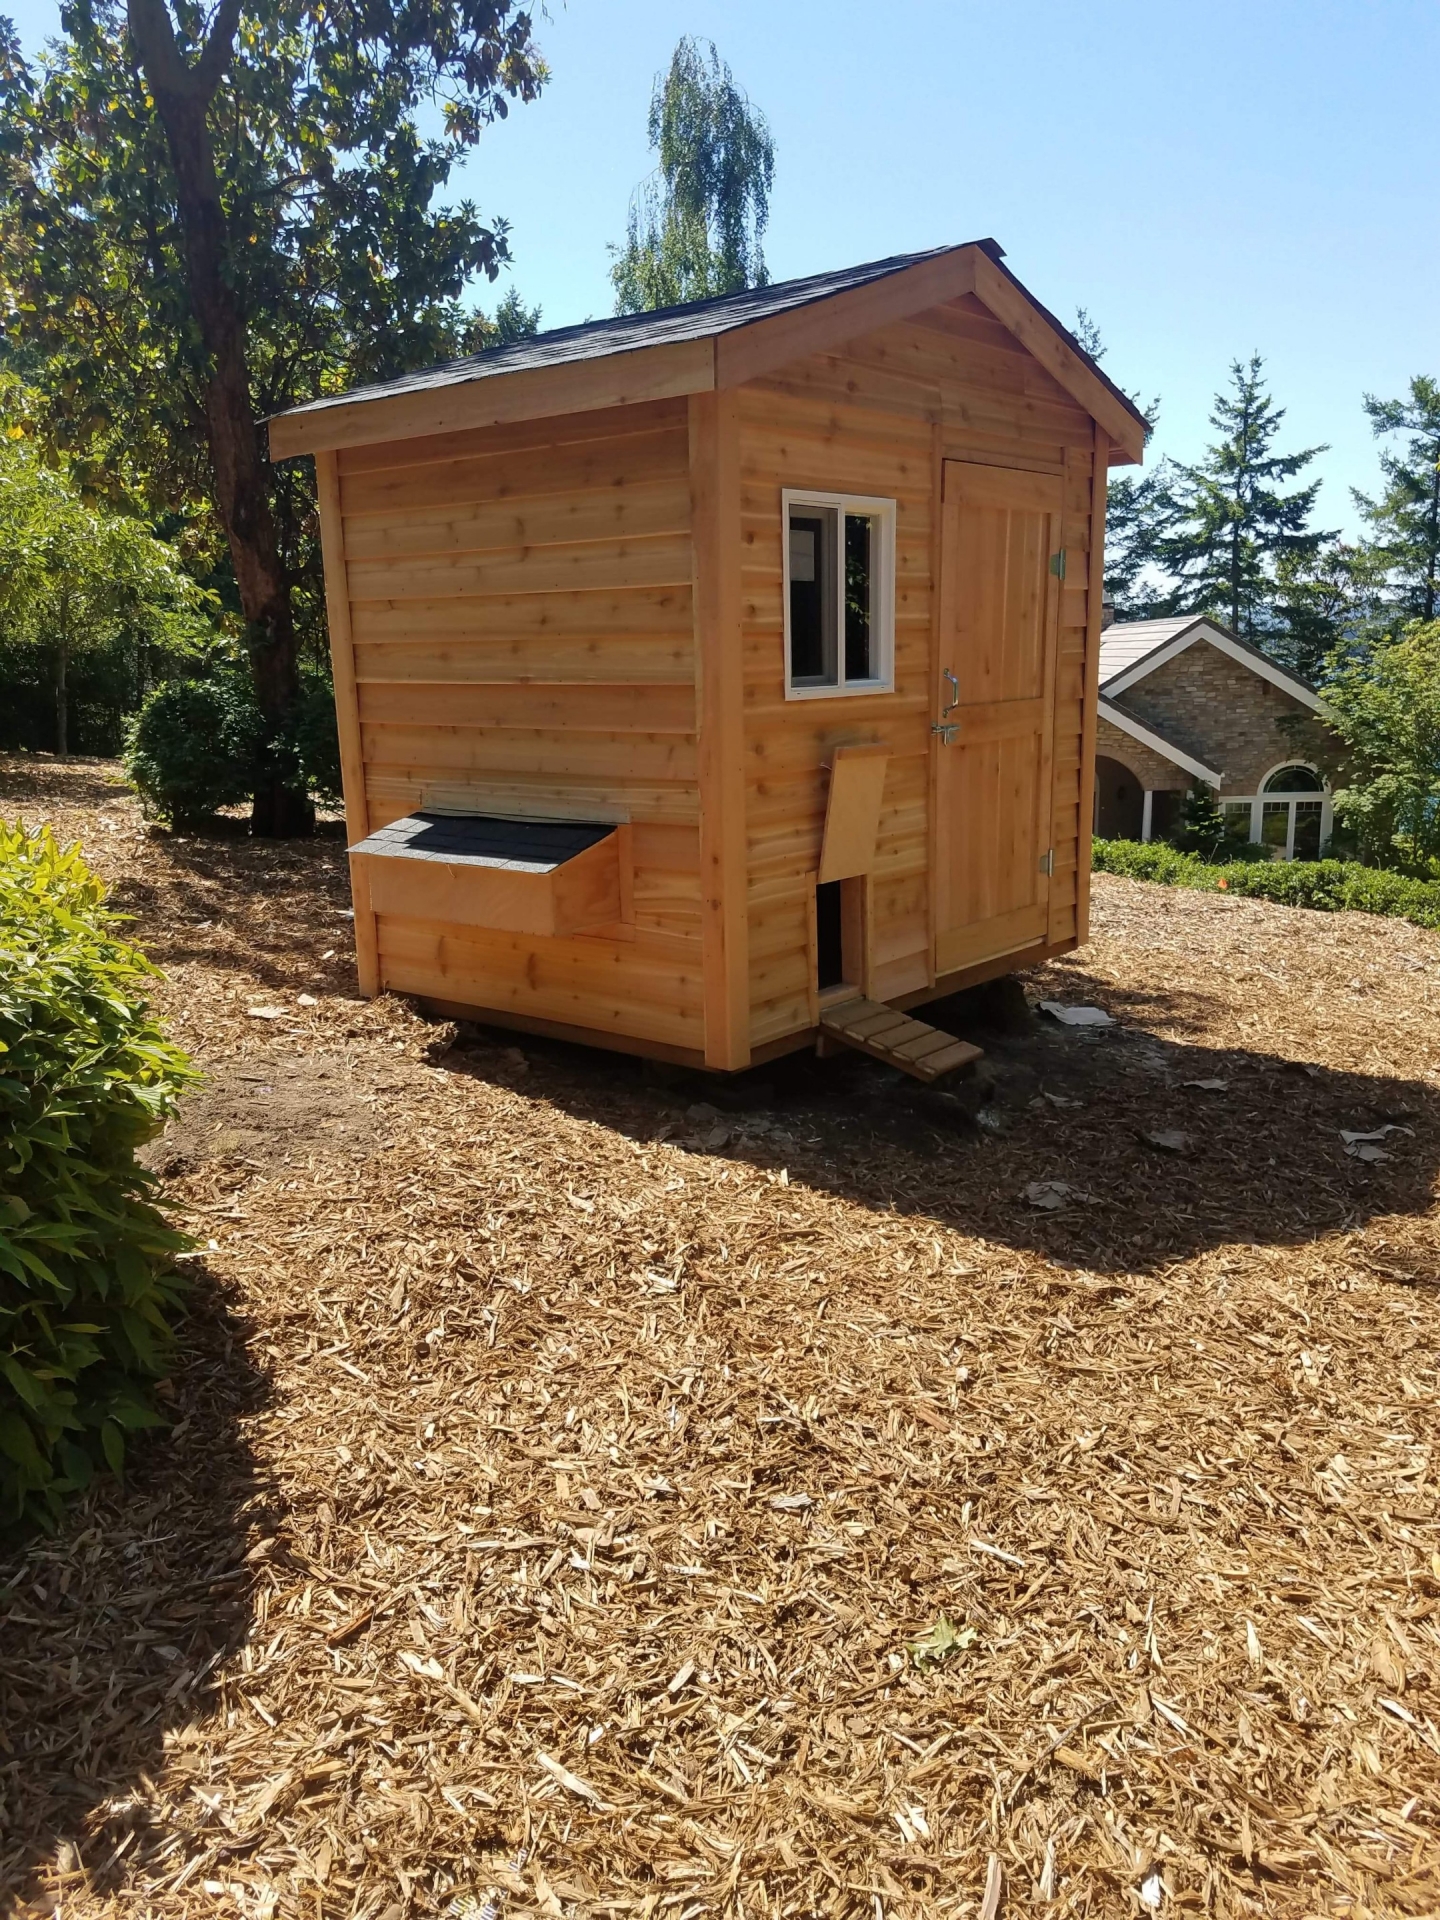 8X6 Standard Shed